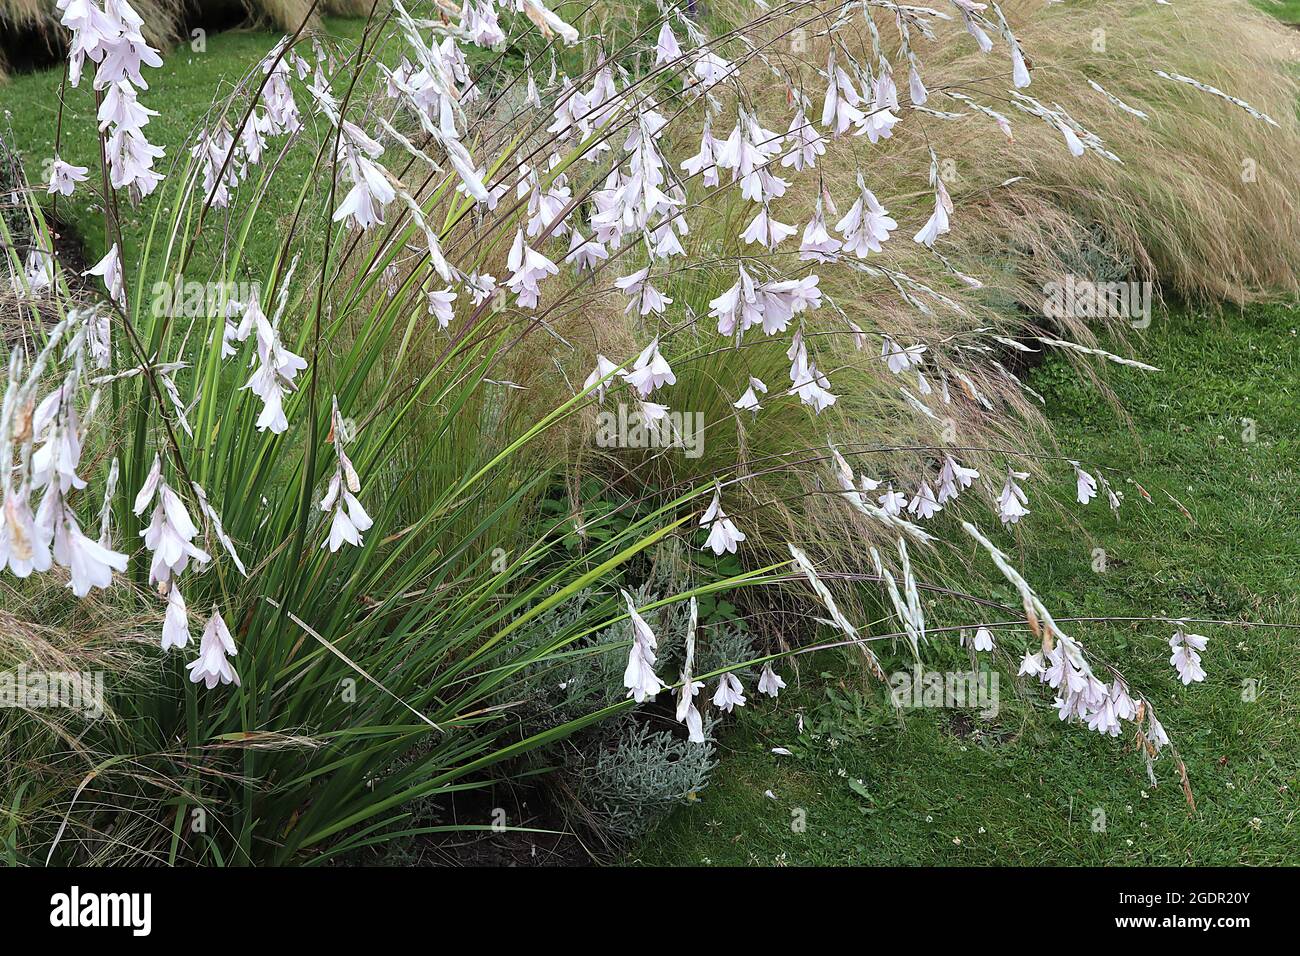 Dierama ‘Guinevere’ angels fishing rod Guinevere – arching stems of white pendulous flowers,  July, England, UK Stock Photo